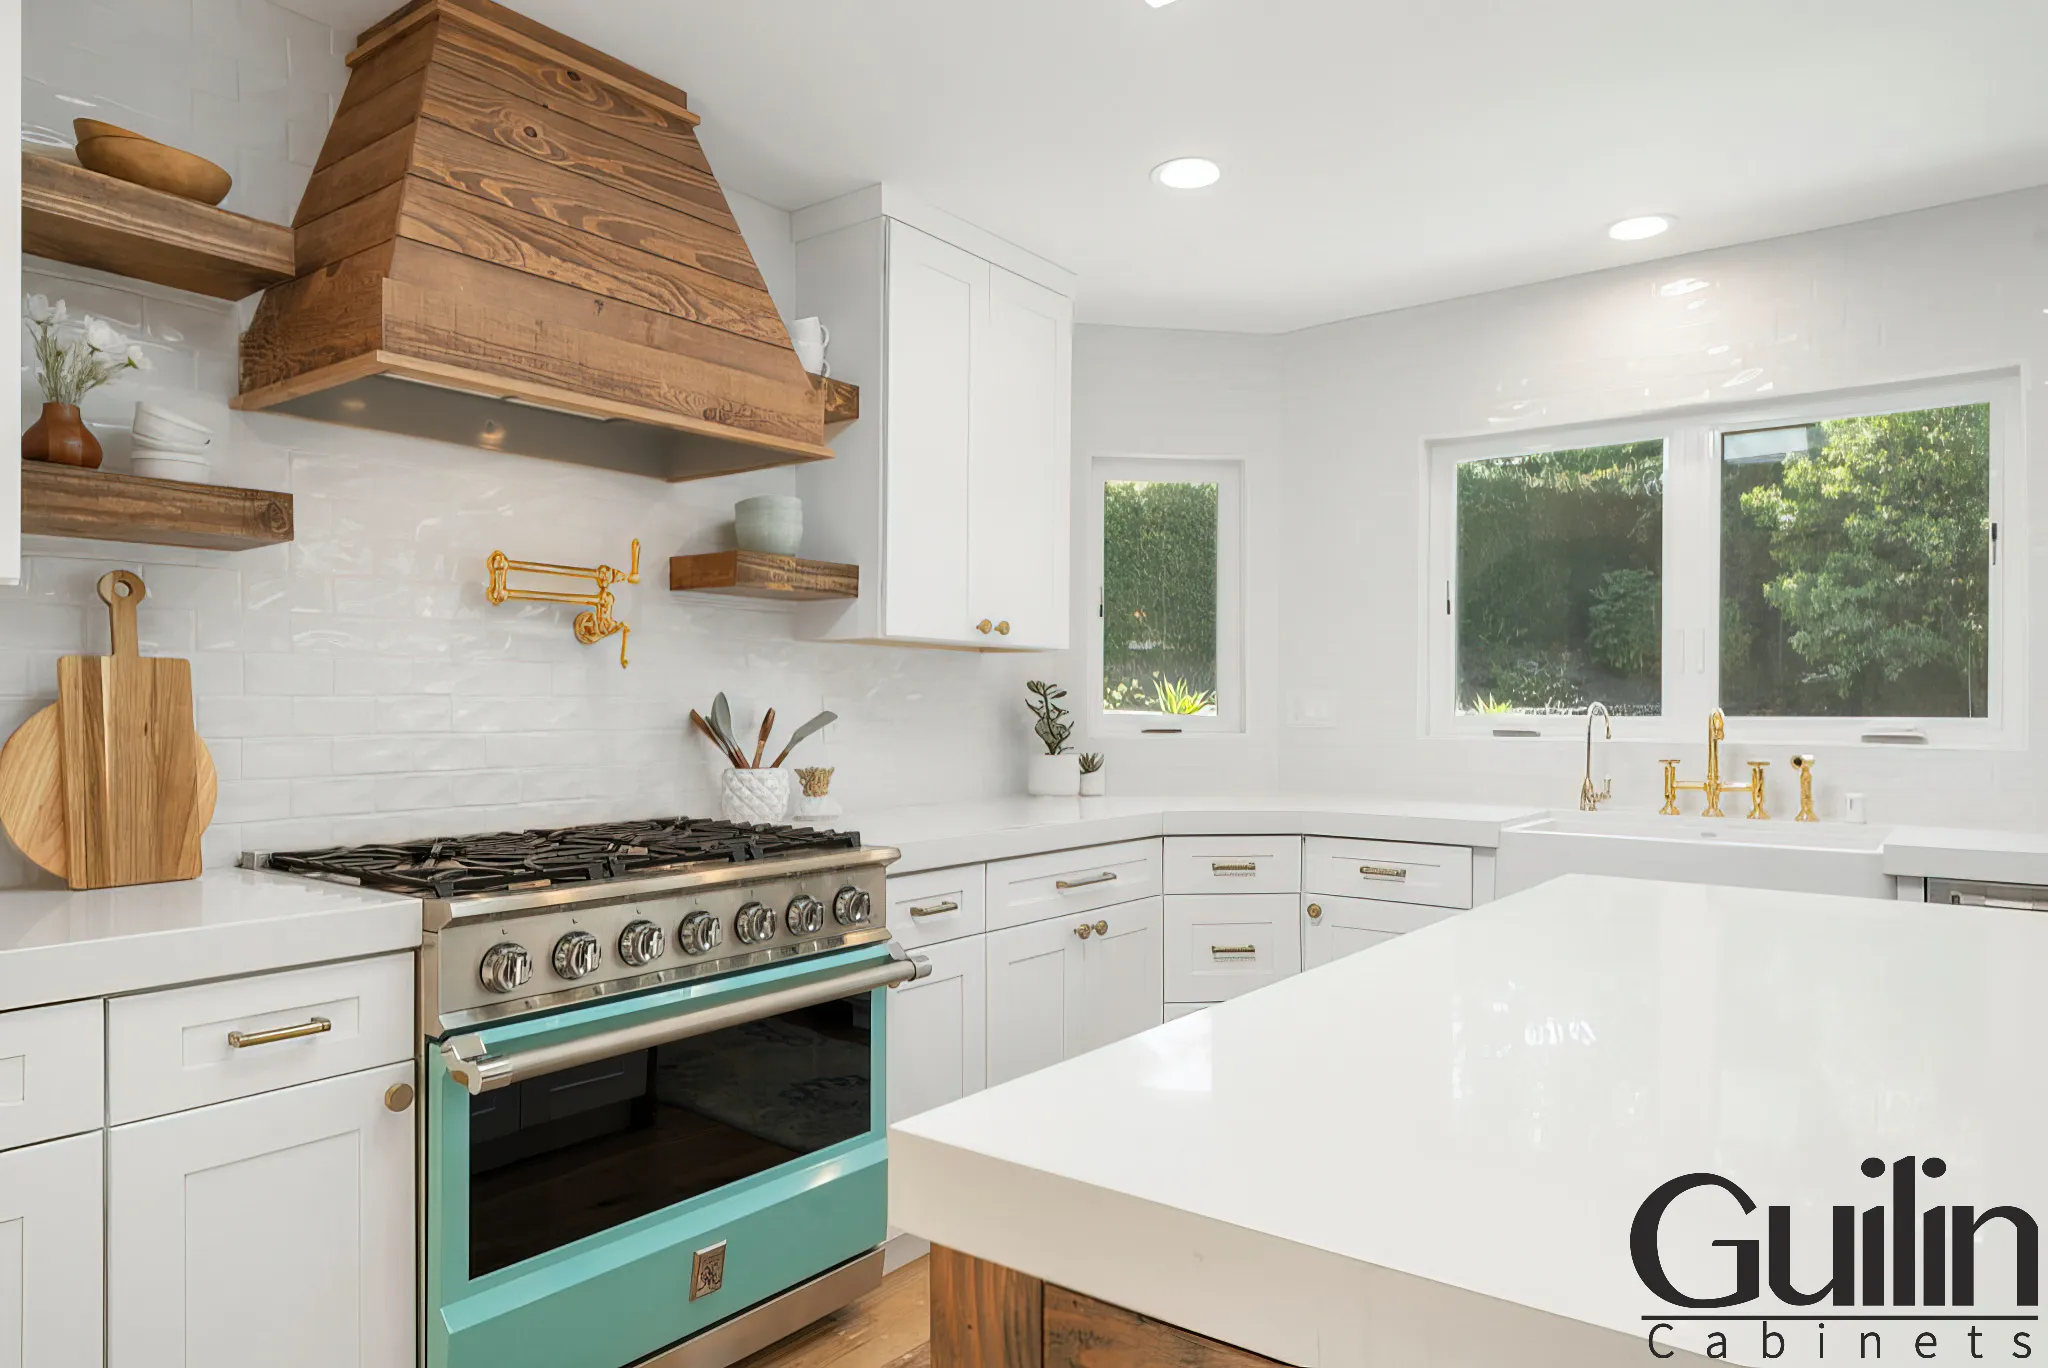 White Kitchen Project Farm House Style Remodel By Guilin Cabinets In California 3